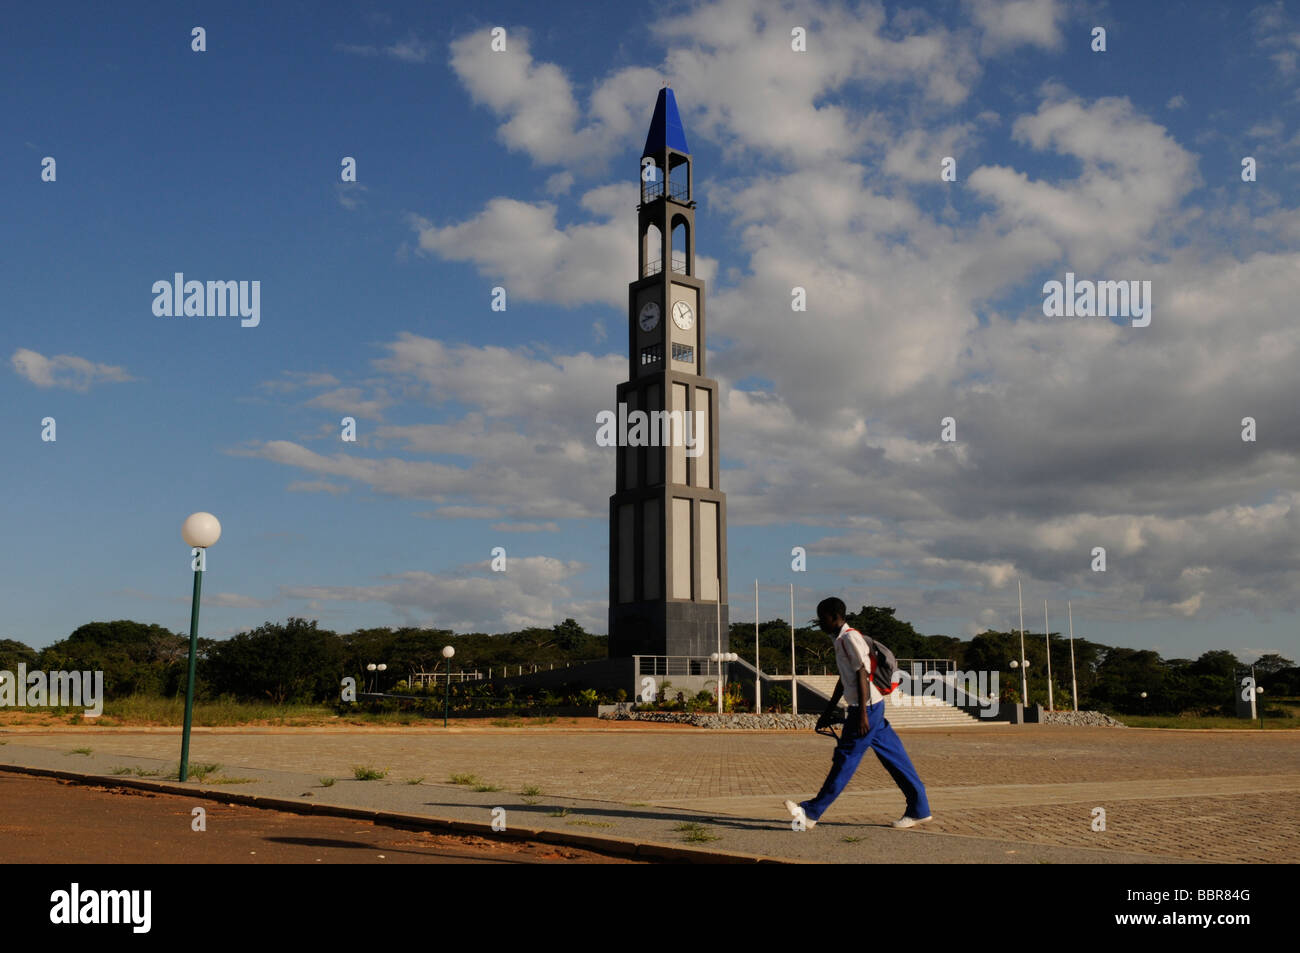 A pedestrian walks past King's African Rifles memorial tower to commemorate WWI and WWII in Lilongwe capital of Malawi Central Africa Stock Photo